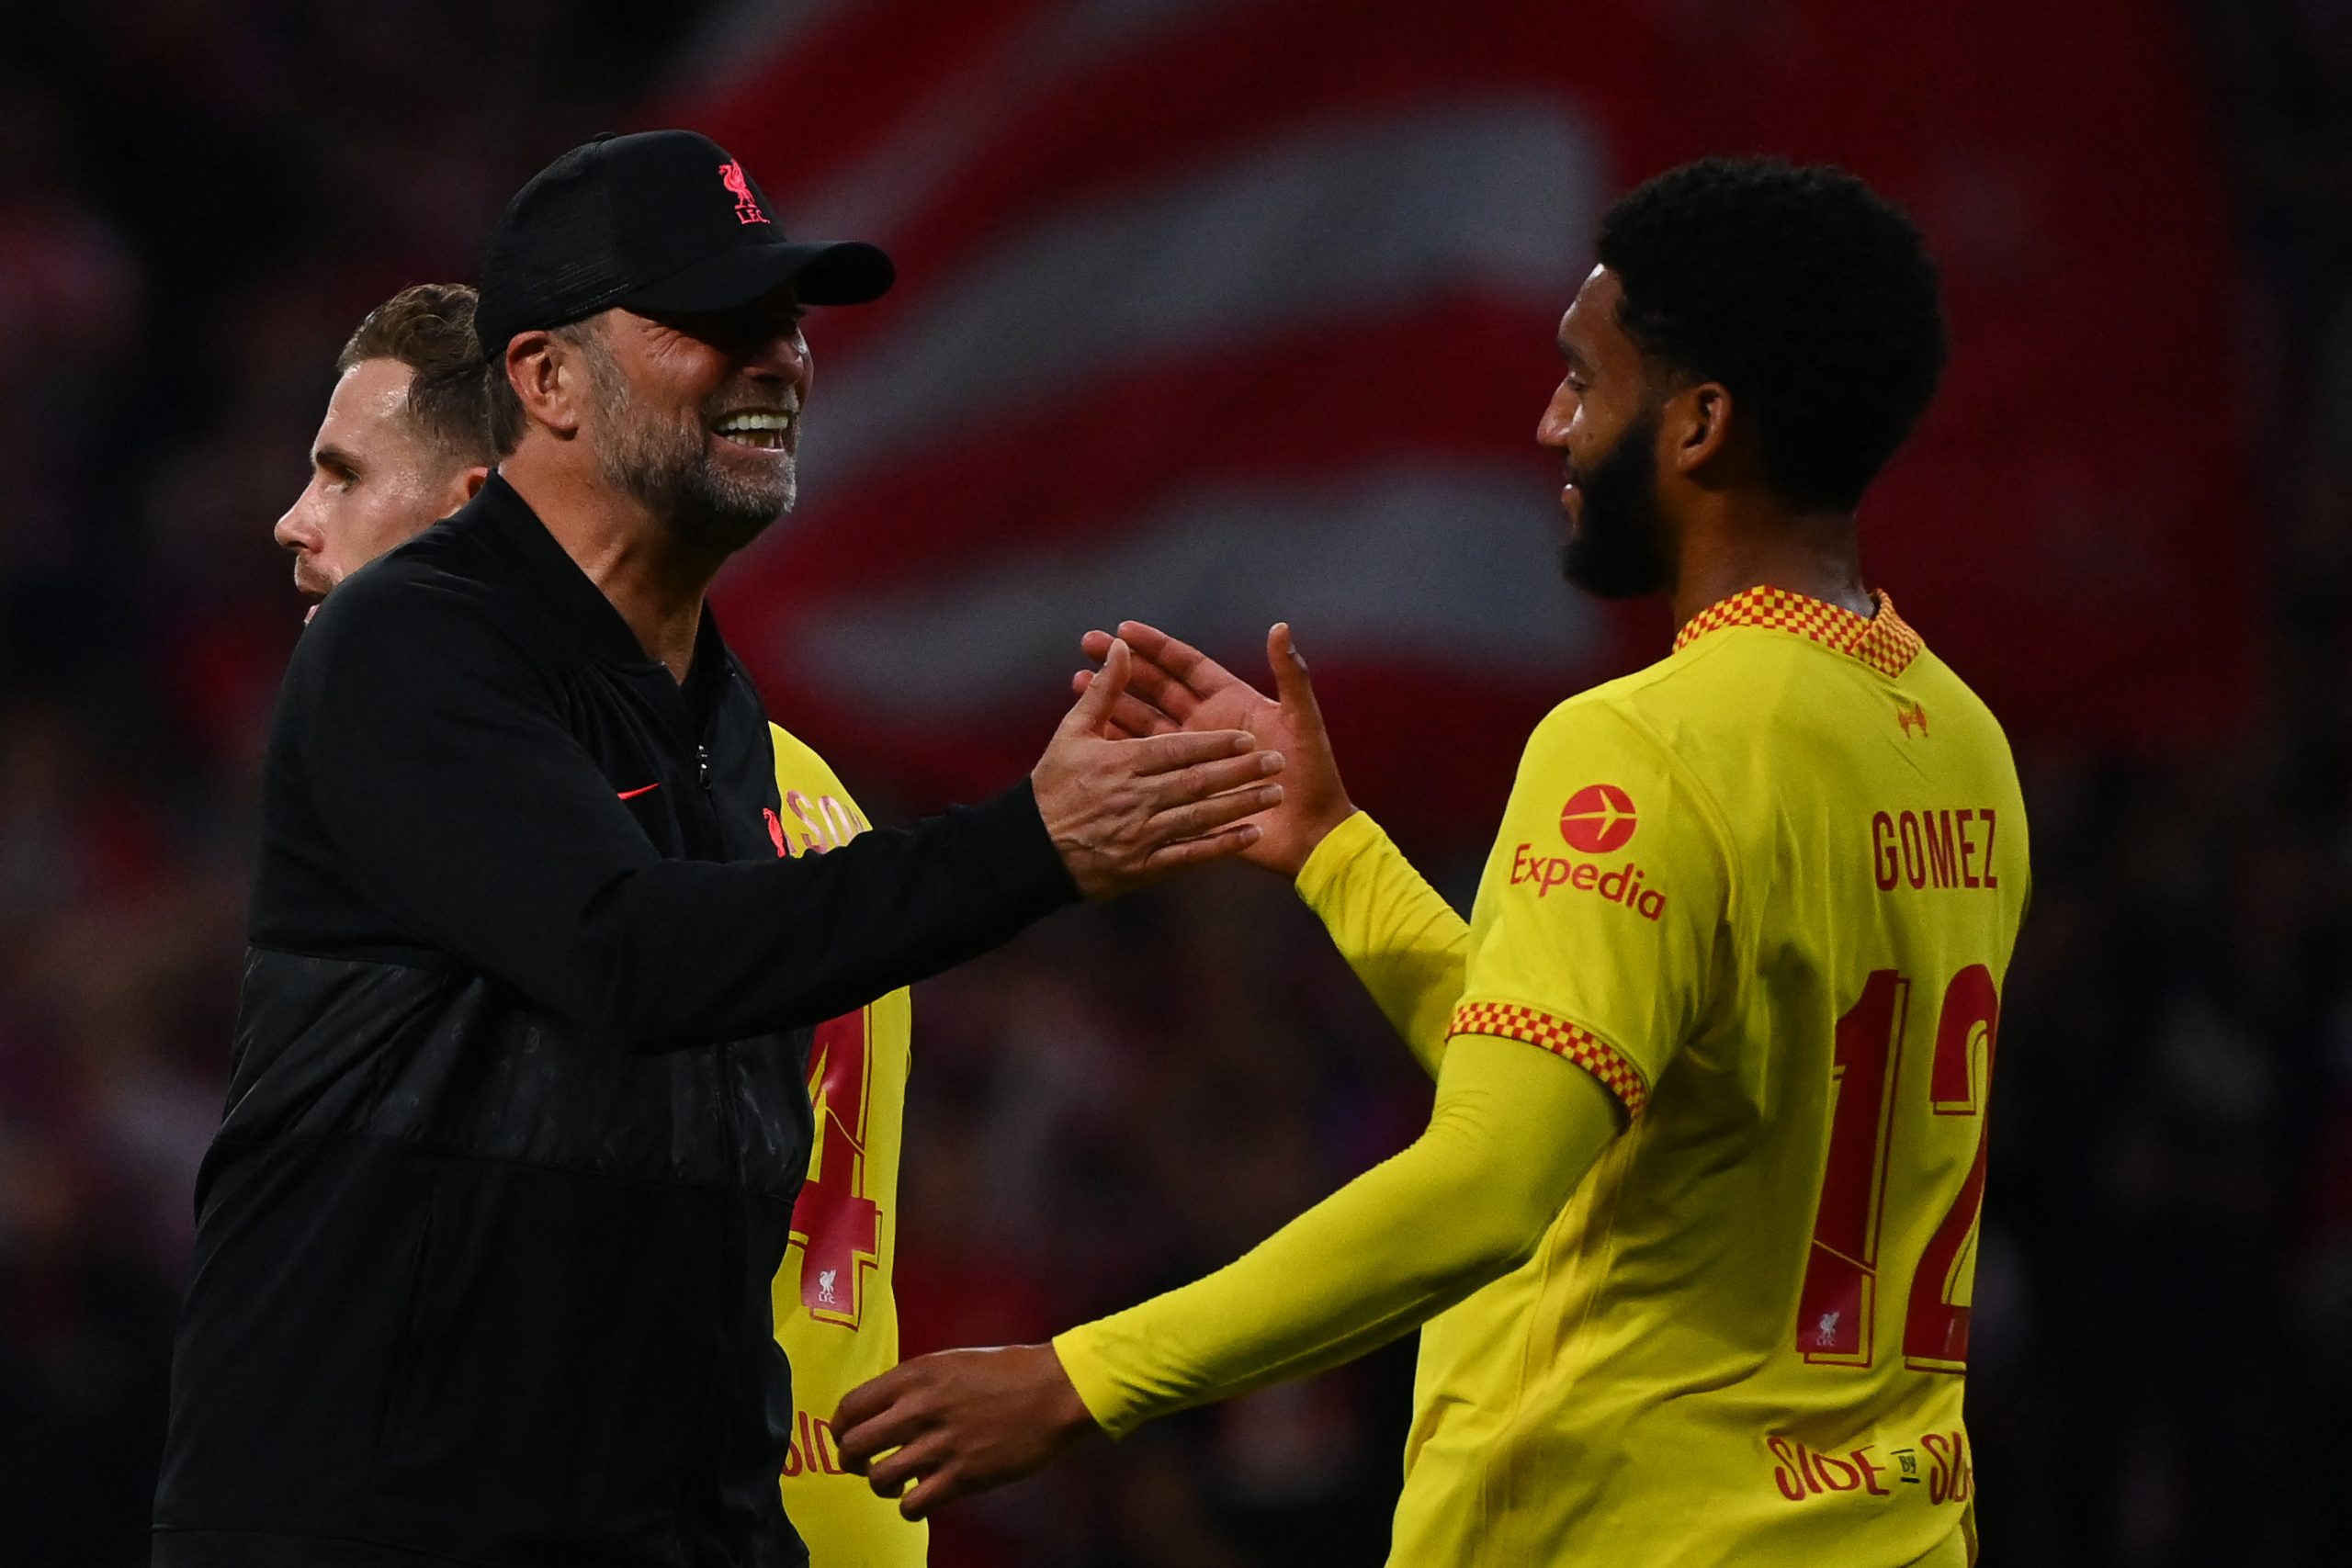 Liverpool's German coach Jurgen Klopp (L) celebrates with Liverpool's English defender Joe Gomez at the end of the UEFA Champions League Group B football match between Atletico Madrid and Liverpool at the Wanda Metropolitano stadium in Madrid on October 19, 2021. (Photo by GABRIEL BOUYS / AFP) (Photo by GABRIEL BOUYS/AFP via Getty Images)The 4th Official uses images provided by the following image agency: Getty Images (https://www.gettyimages.de/) Imago Images (https://www.imago-images.de/)